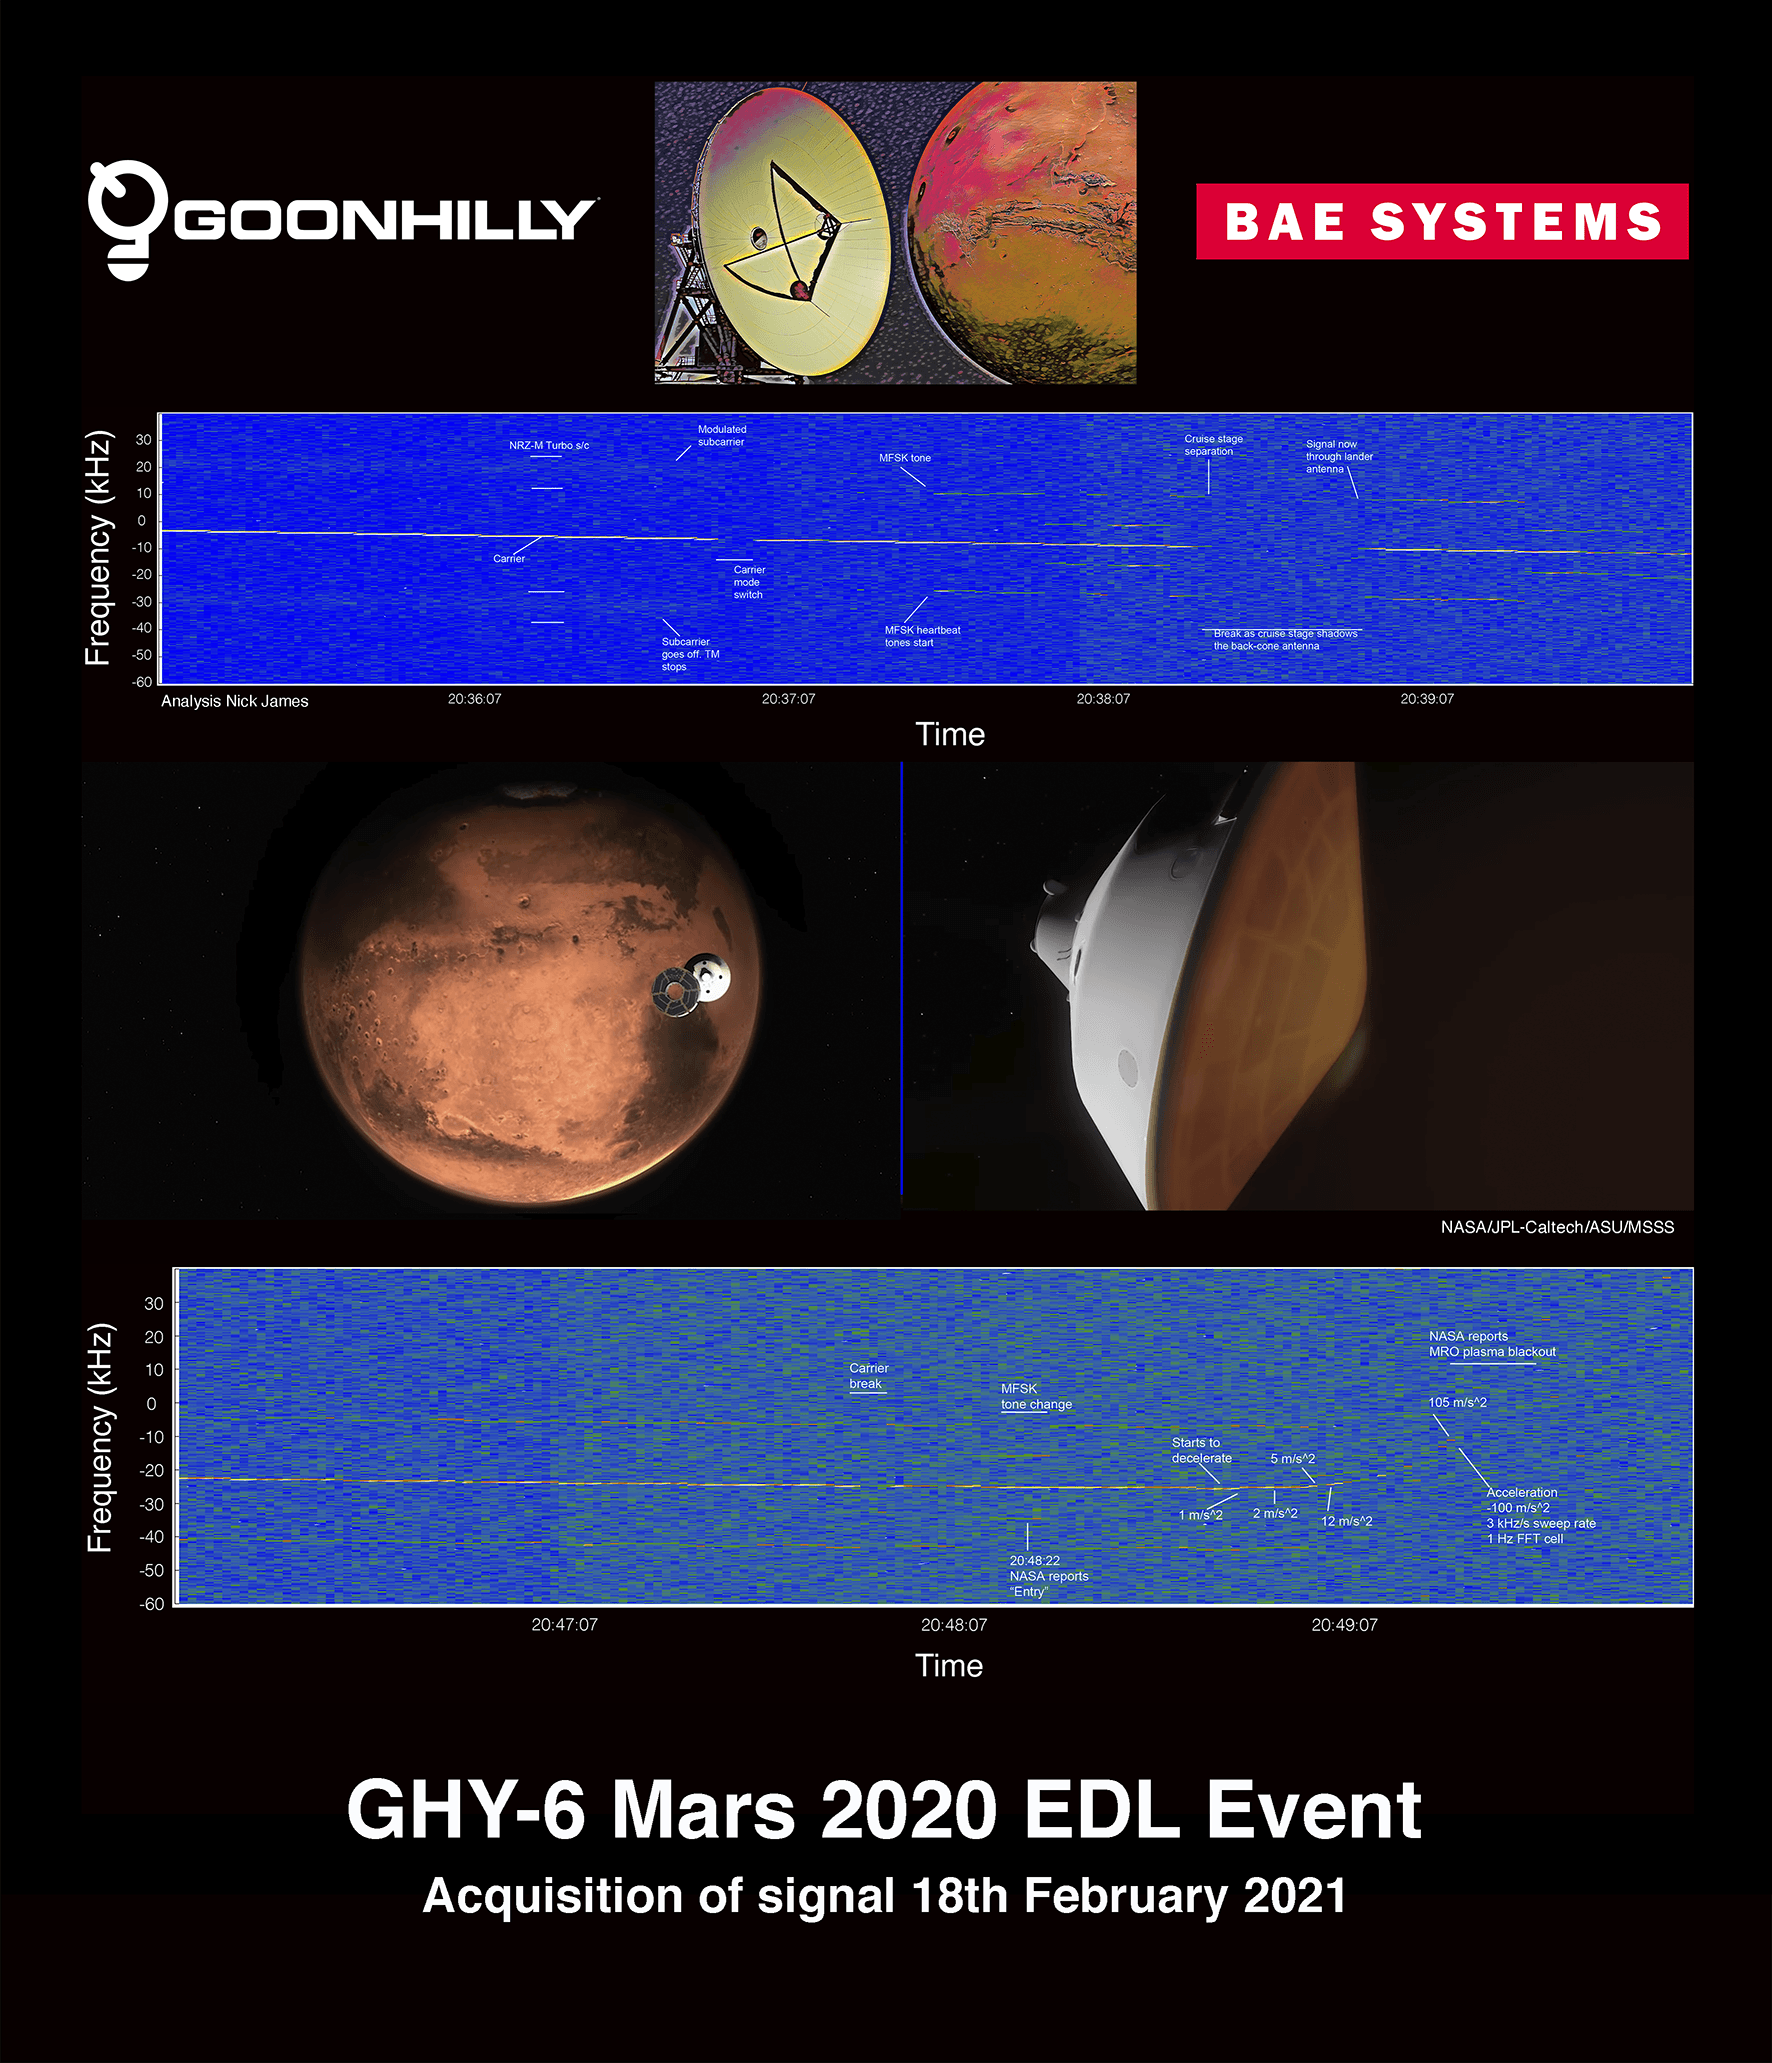 Signal trace of Mars 2020 as recorded by GHY-6